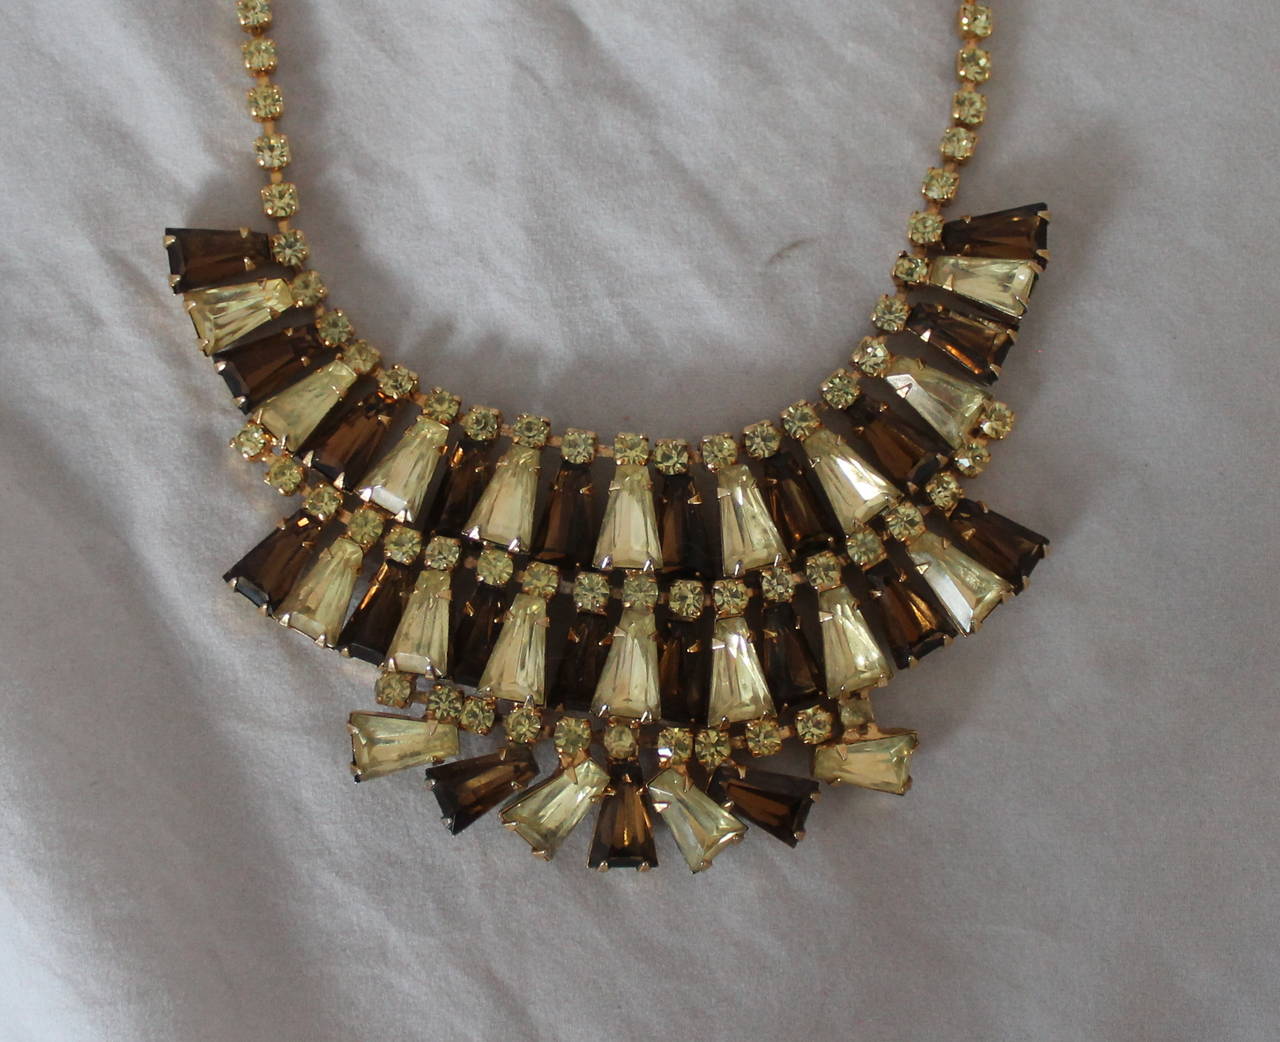 Art Deco Vintage Amber & Topaz Rhinestone Pronged Bib Necklace. This piece is in excellent vintage condition with very light wear. 

Length- up to 10.25